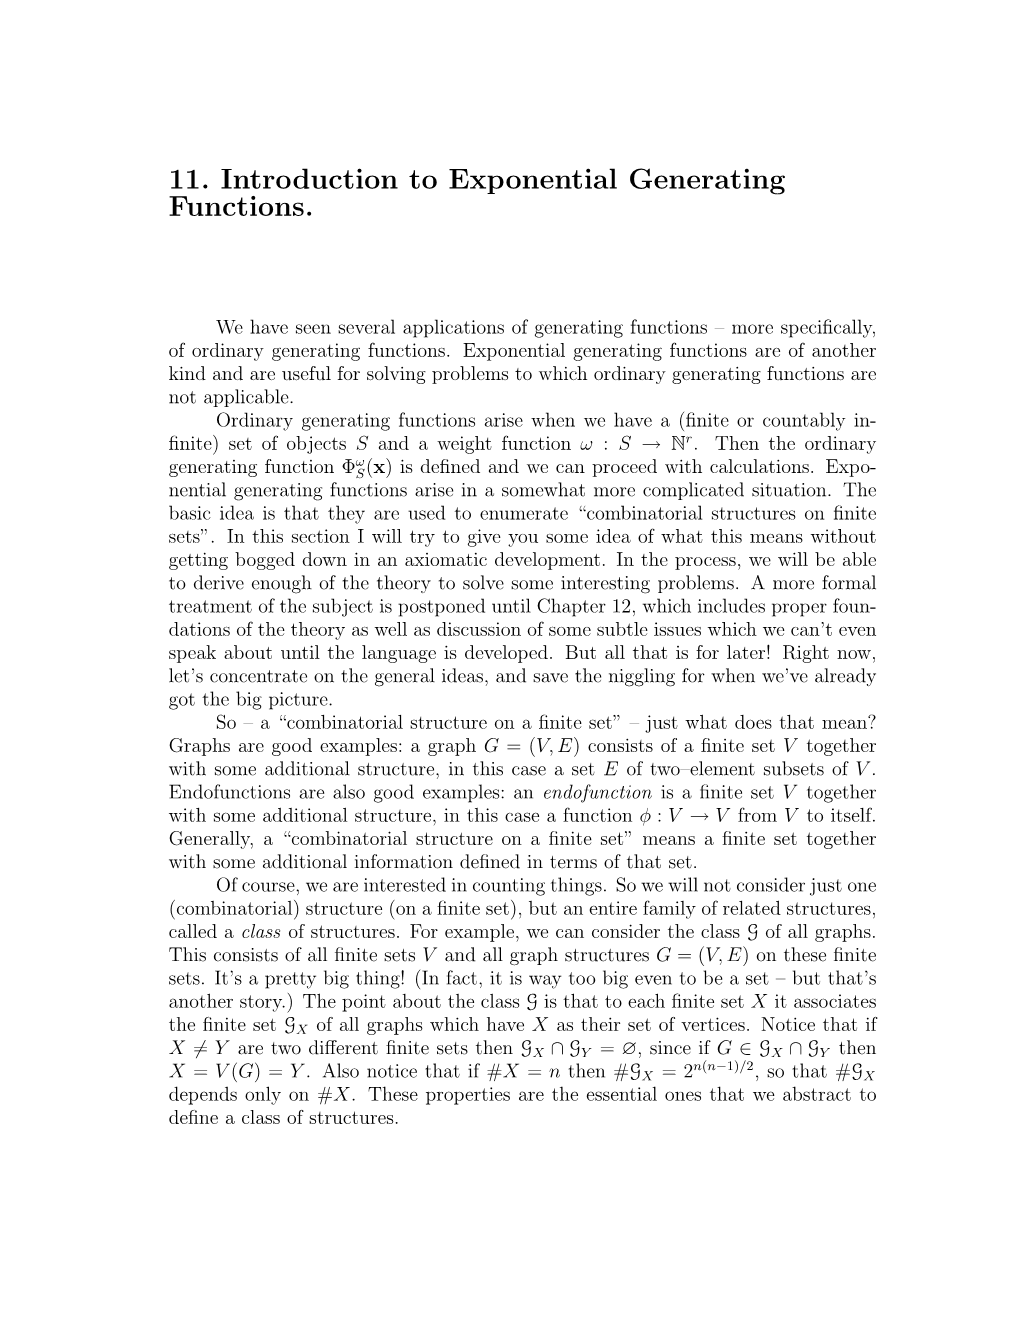 11. Introduction to Exponential Generating Functions